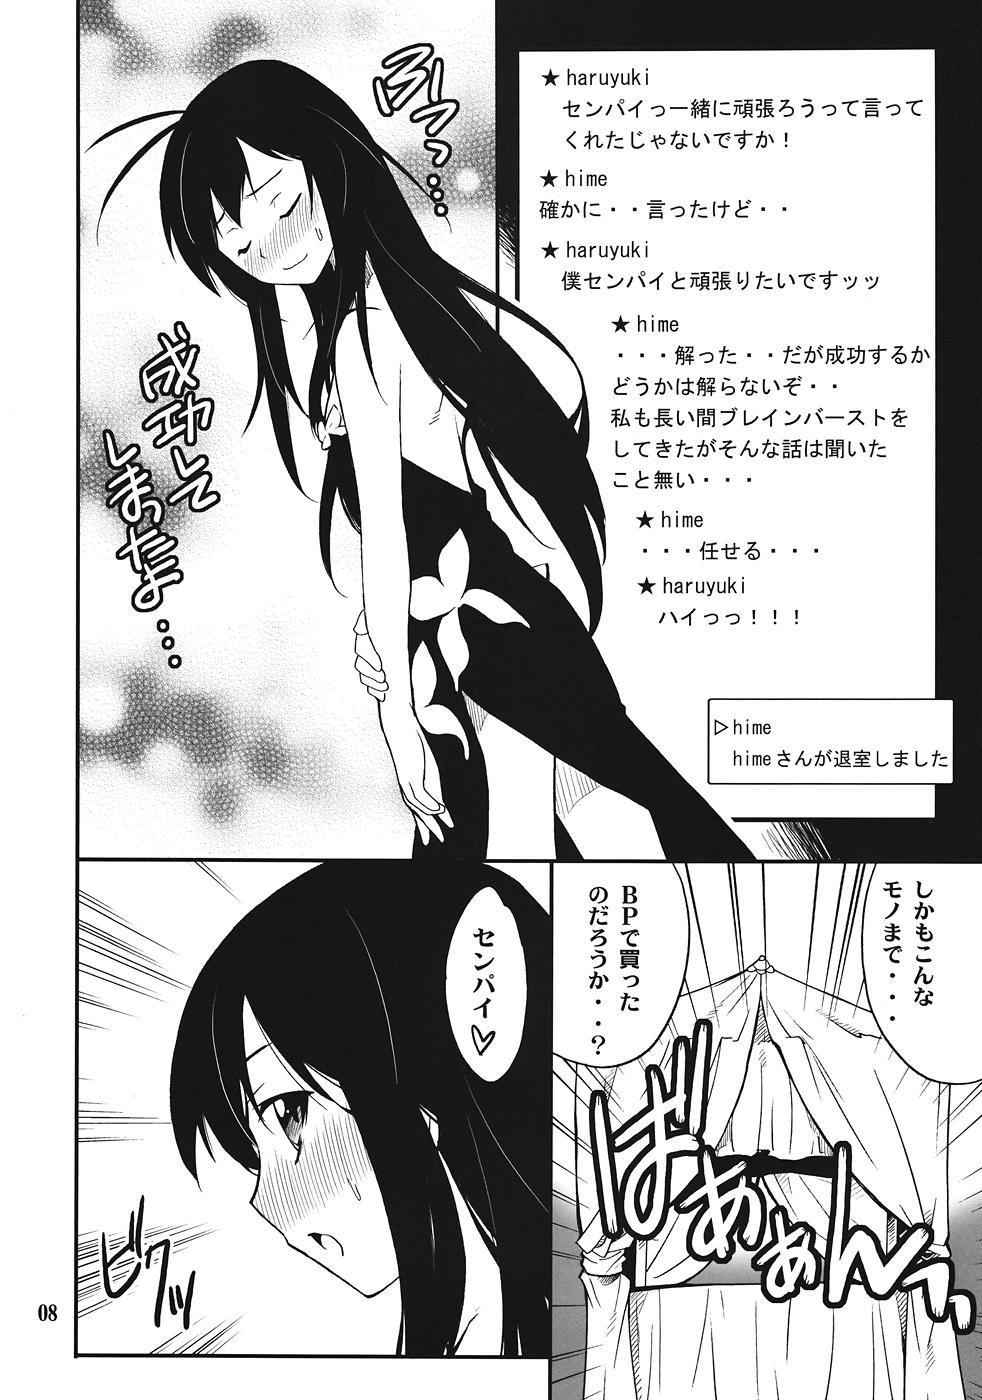 Lover Another World - Accel world Rimjob - Page 7